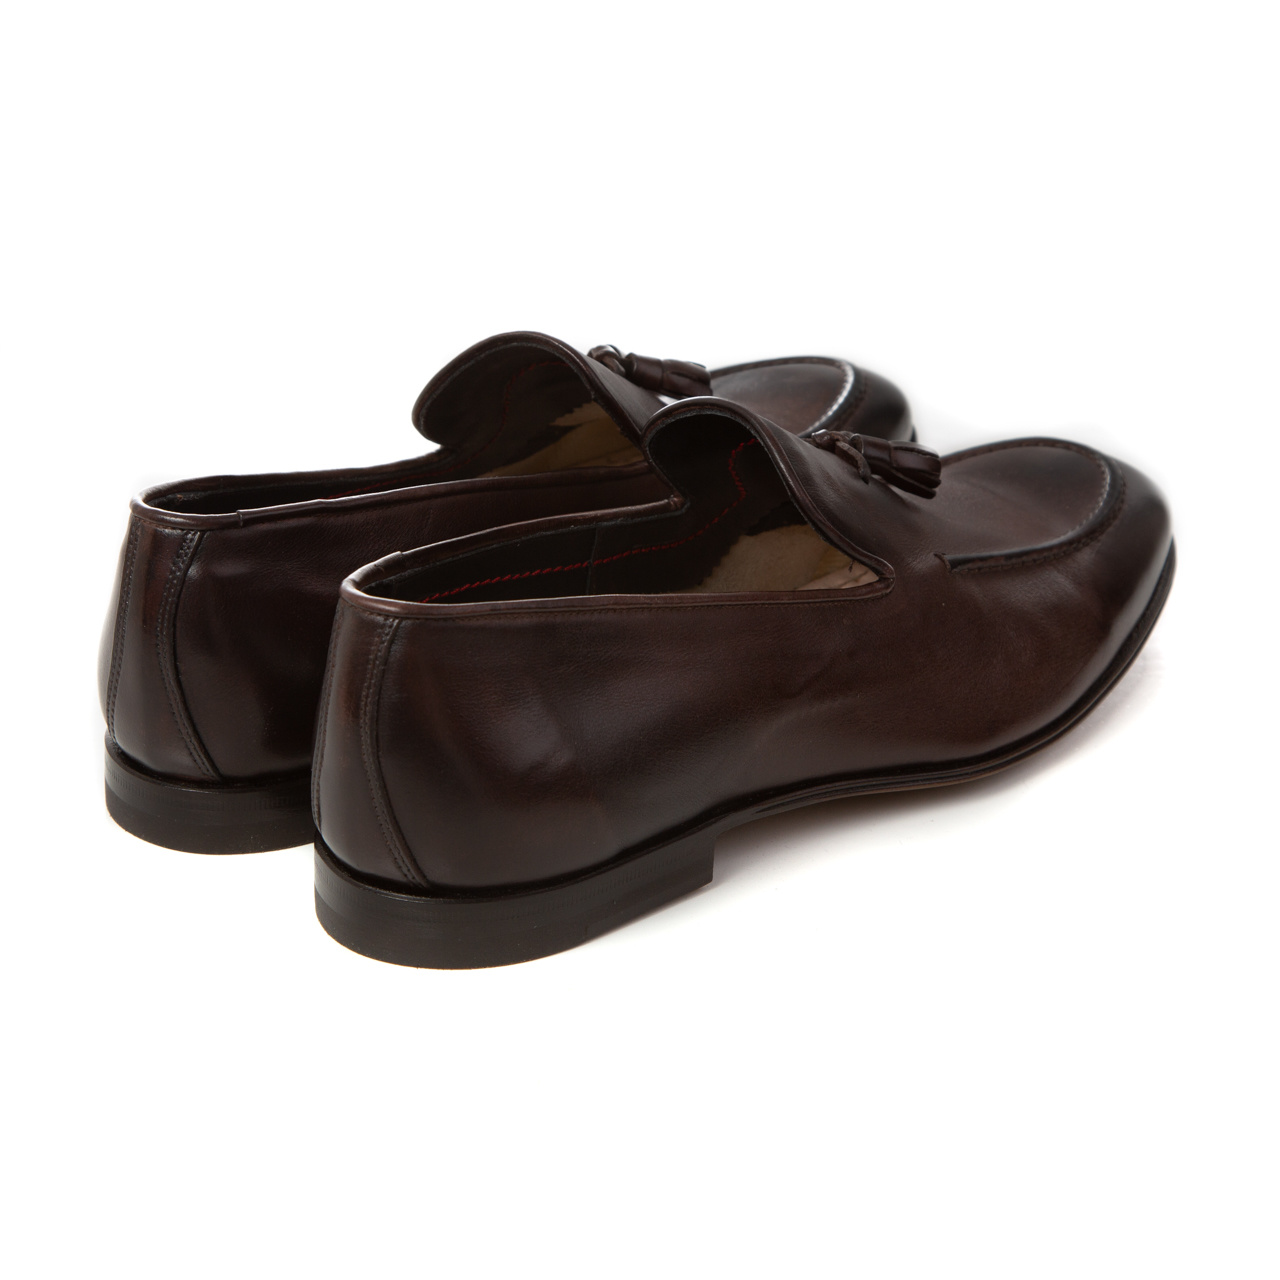 HANDMADE Moccasins calf leather - made in Italy - PM Eleganza Milanese